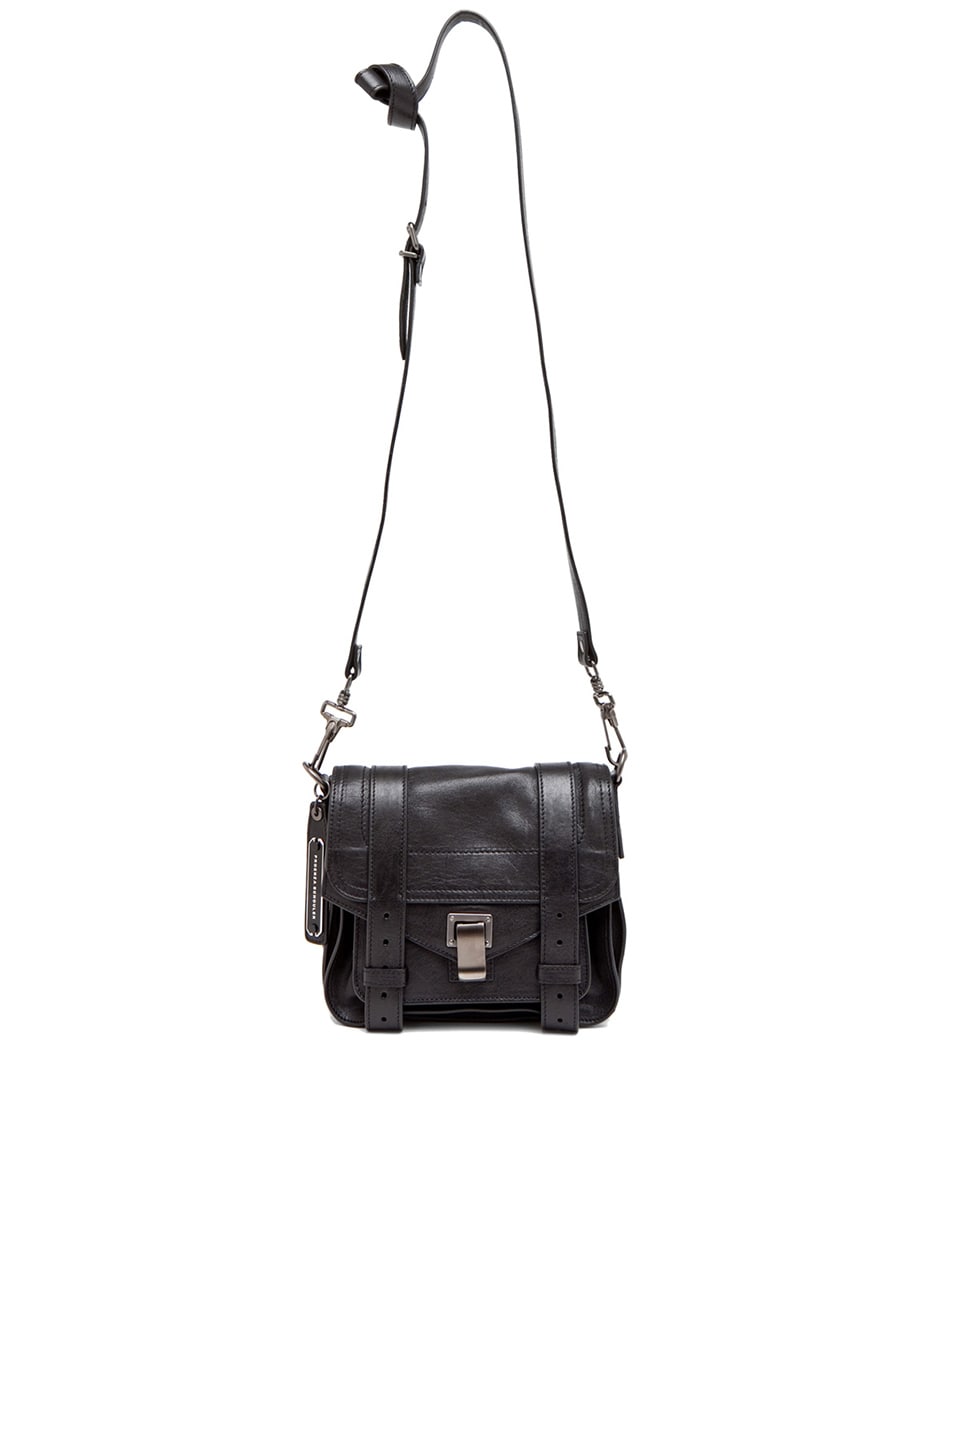 Proenza Schouler PS1 Leather Pouch in Black | FWRD